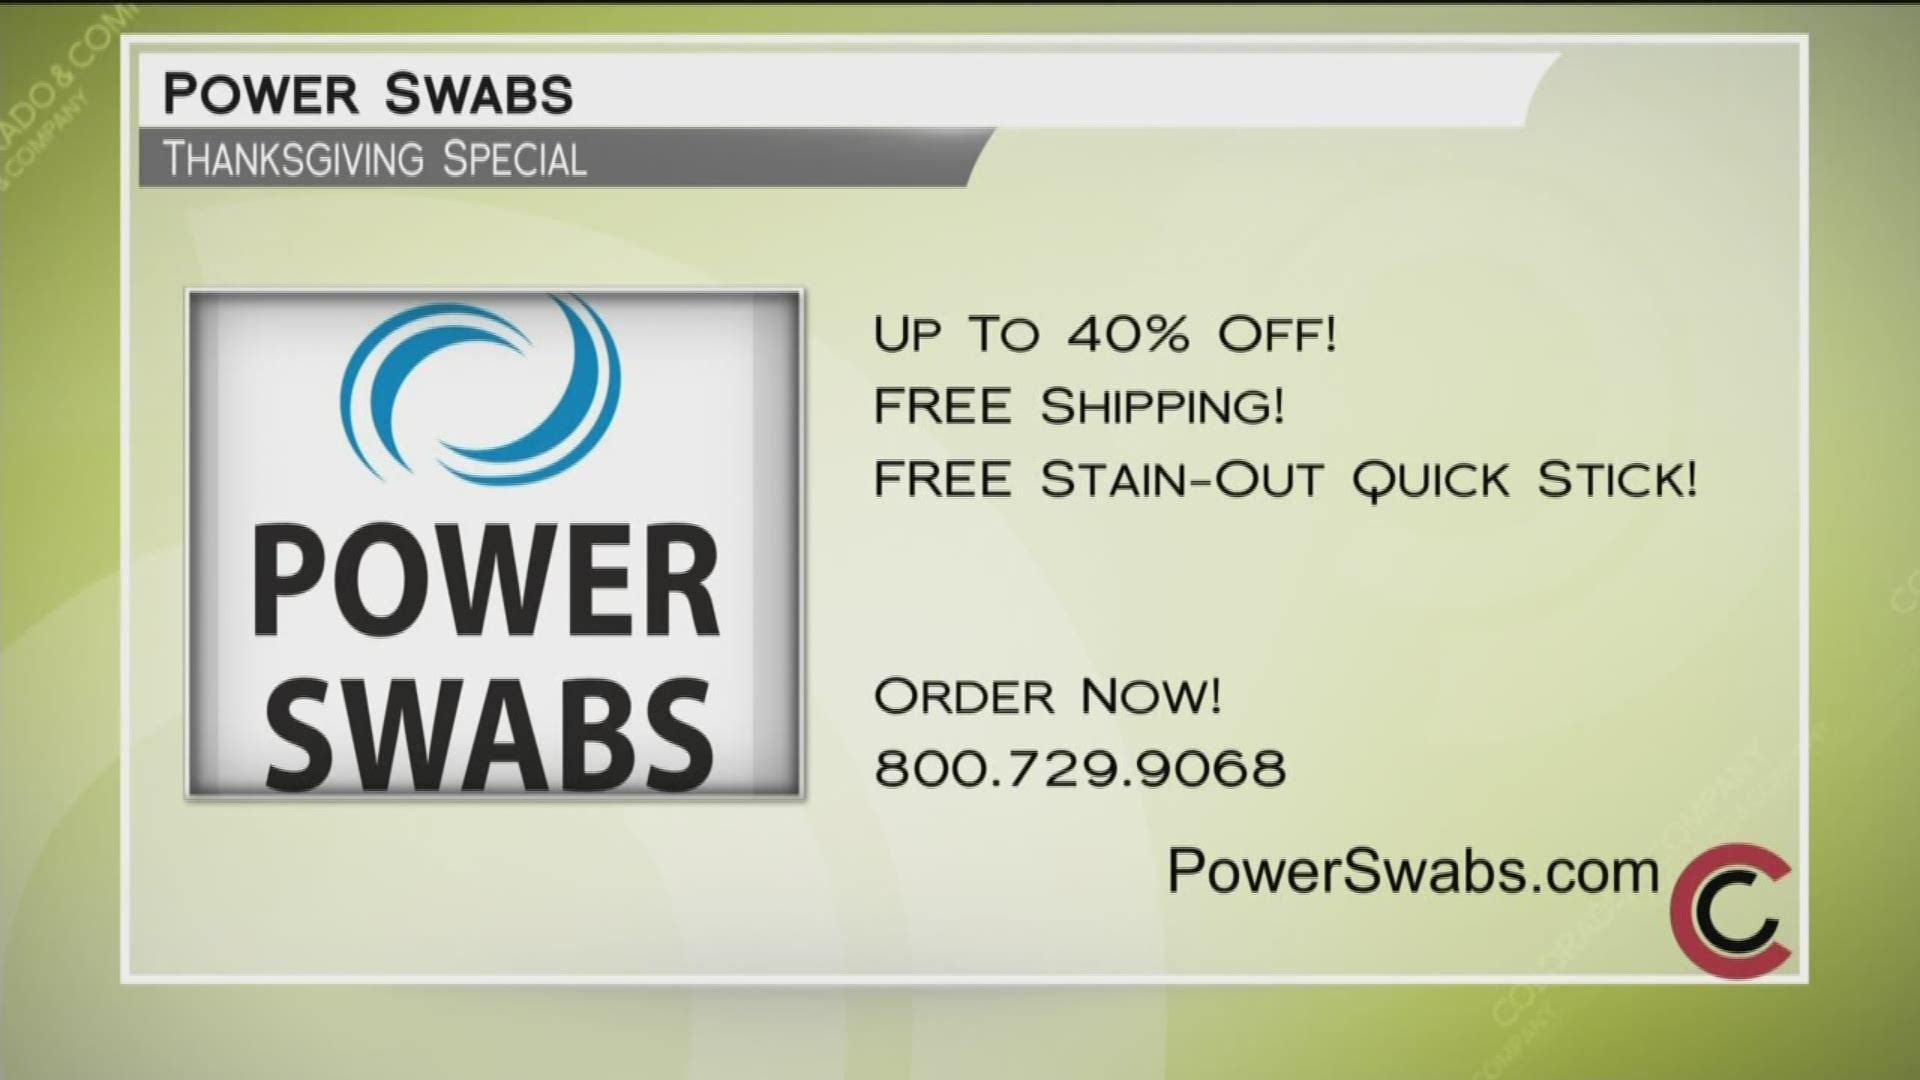 Call 800.729.9068 or visit www.PowerSwabs.com to order yours today! Take advantage of a great deal--40% off and free shipping.